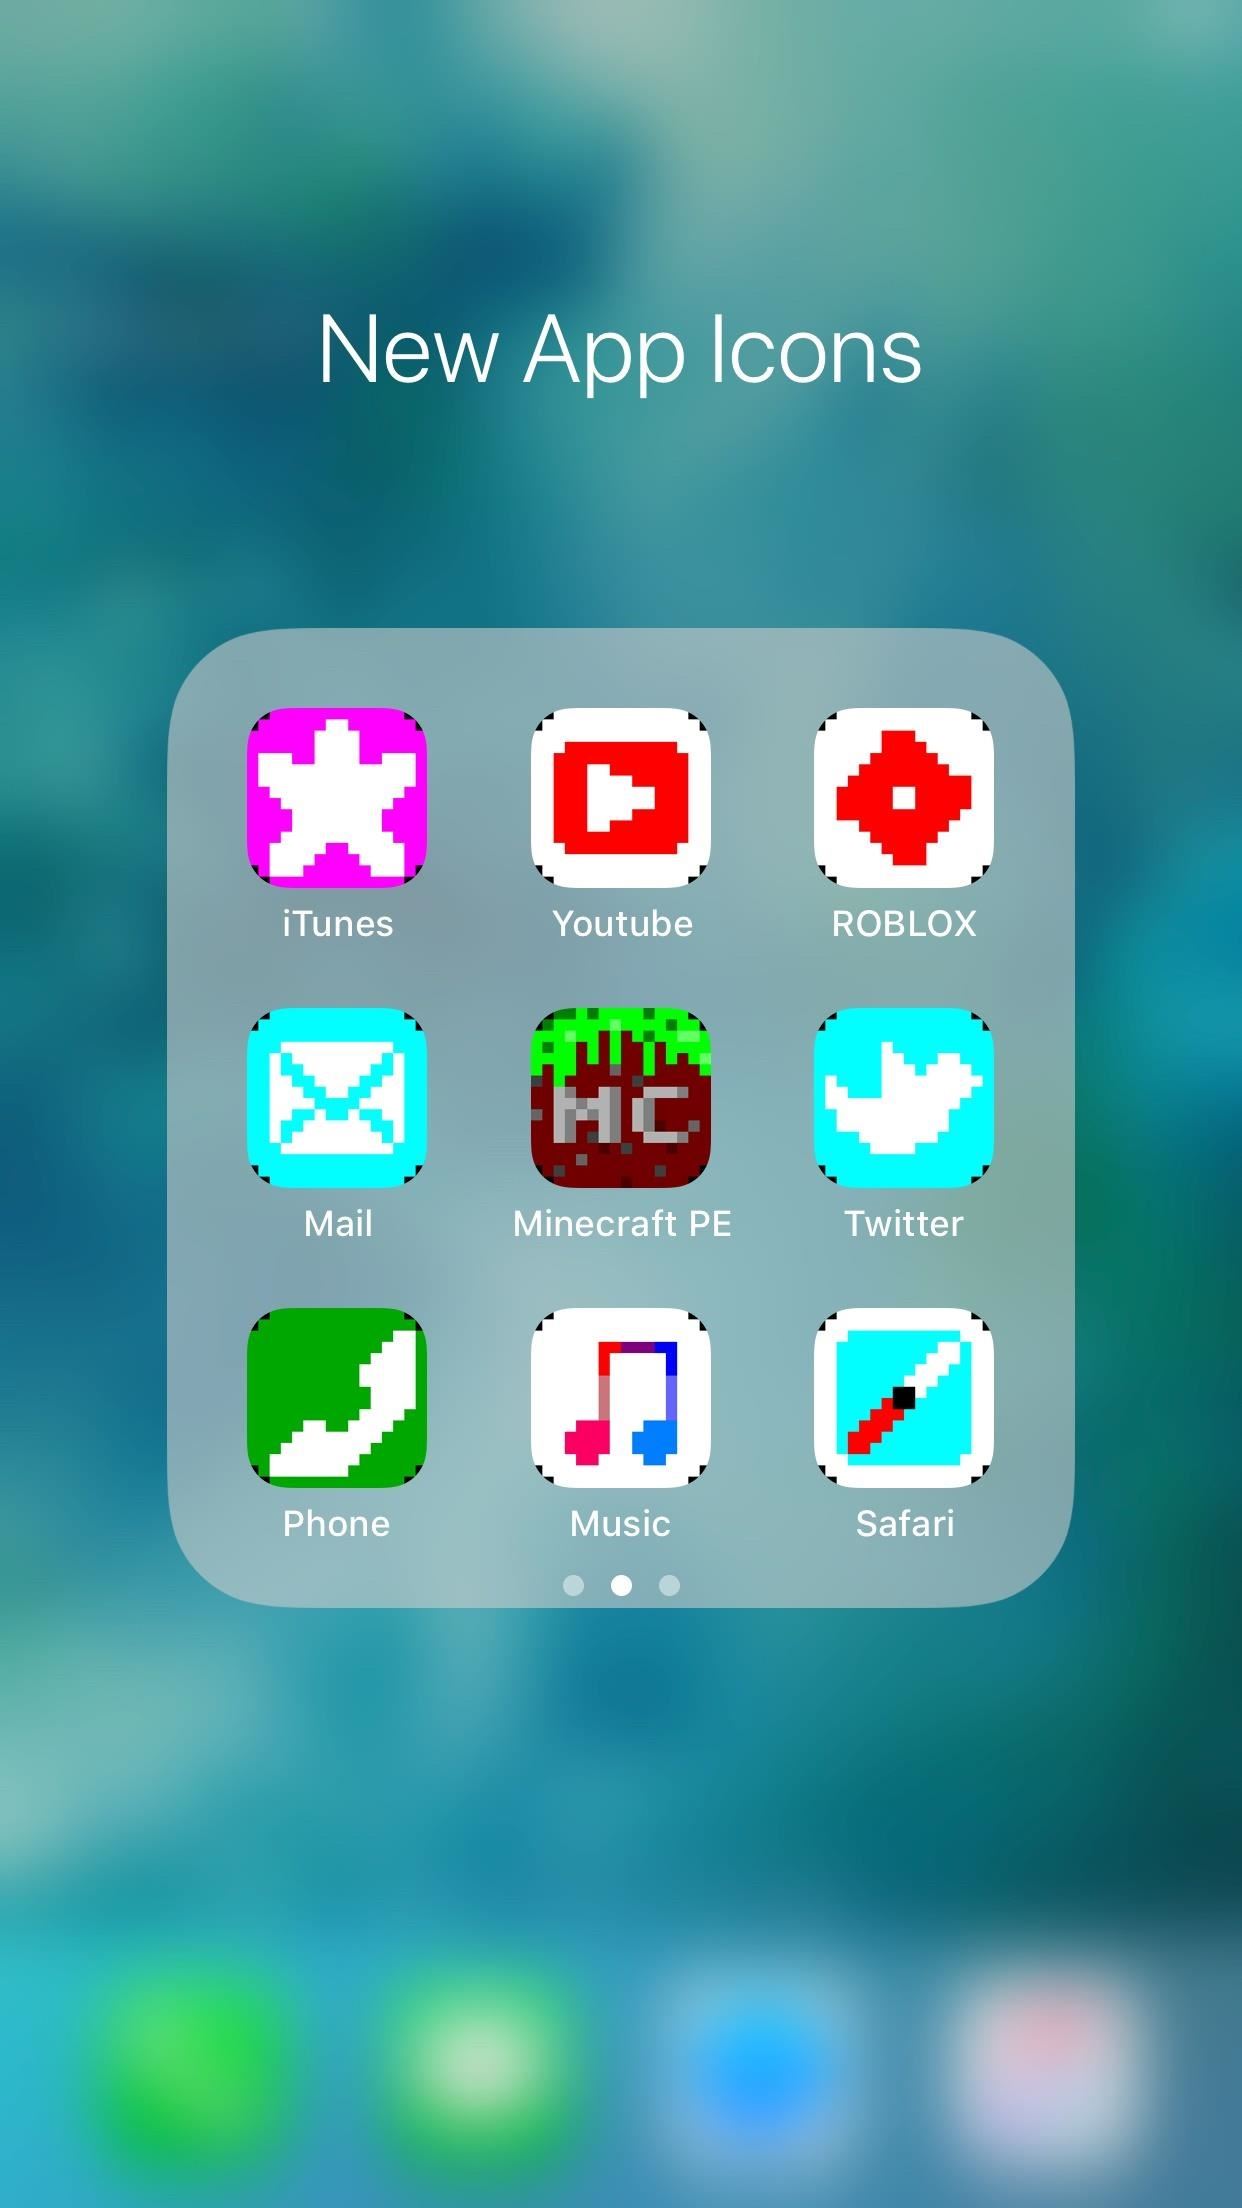 How to Theme the Home Screen App Icons on Your iPhone Without Jailbreaking